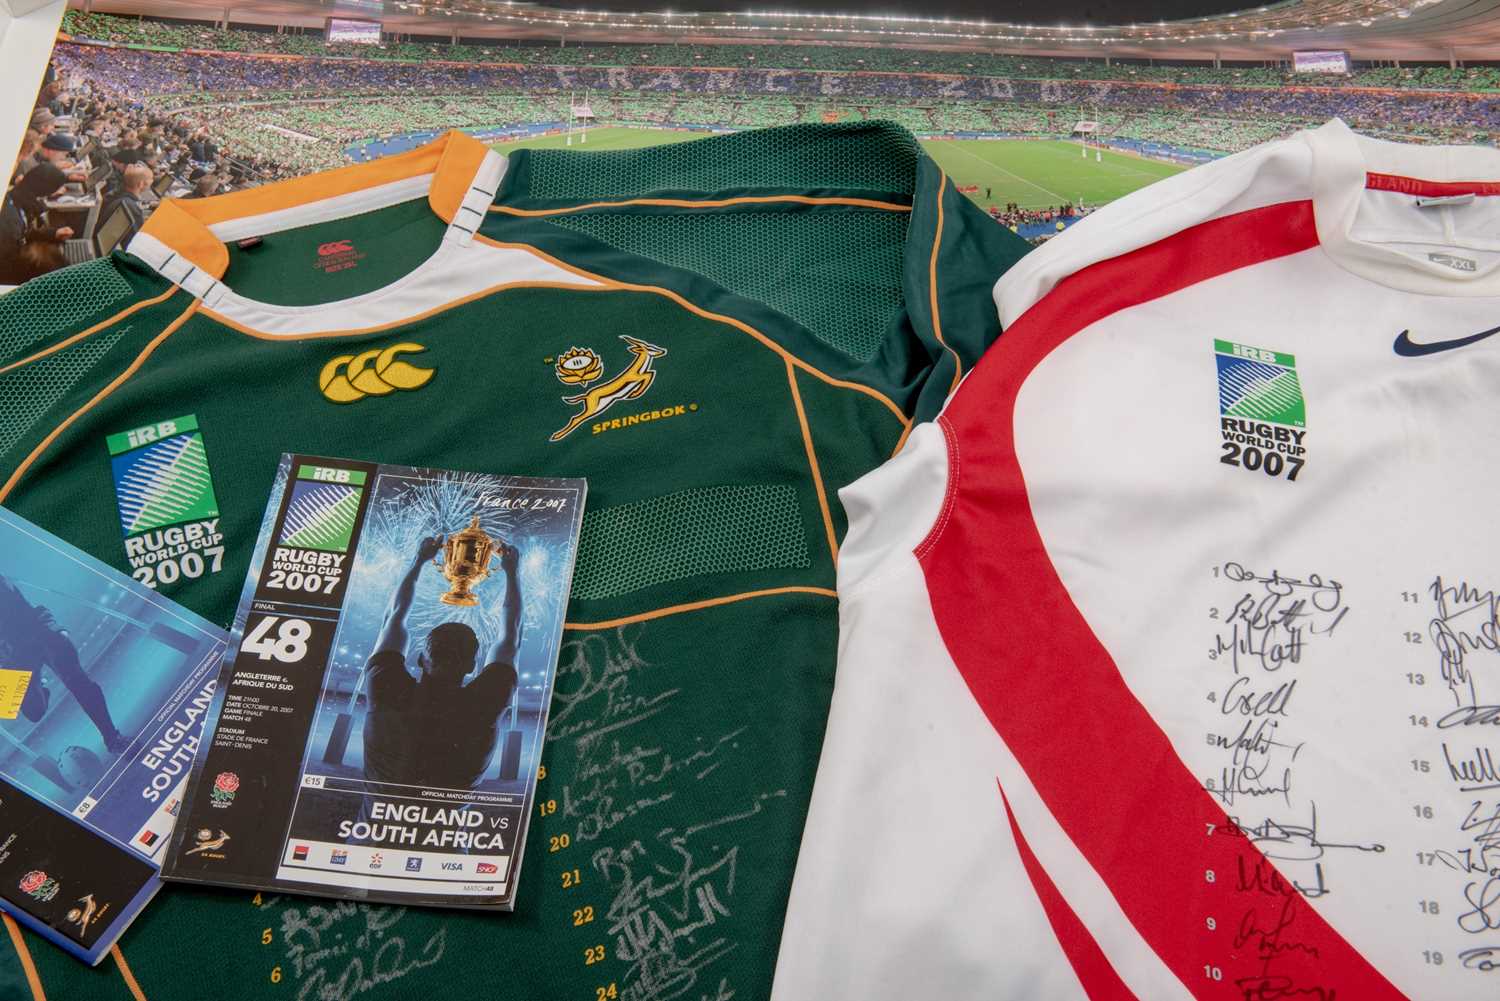 A GOOD MEMORABILIA PACKAGE RELATING TO THE RUGBY WORLD CUP FINAL 2007 BETWEEN SOUTH AFRICA & ENGLAND